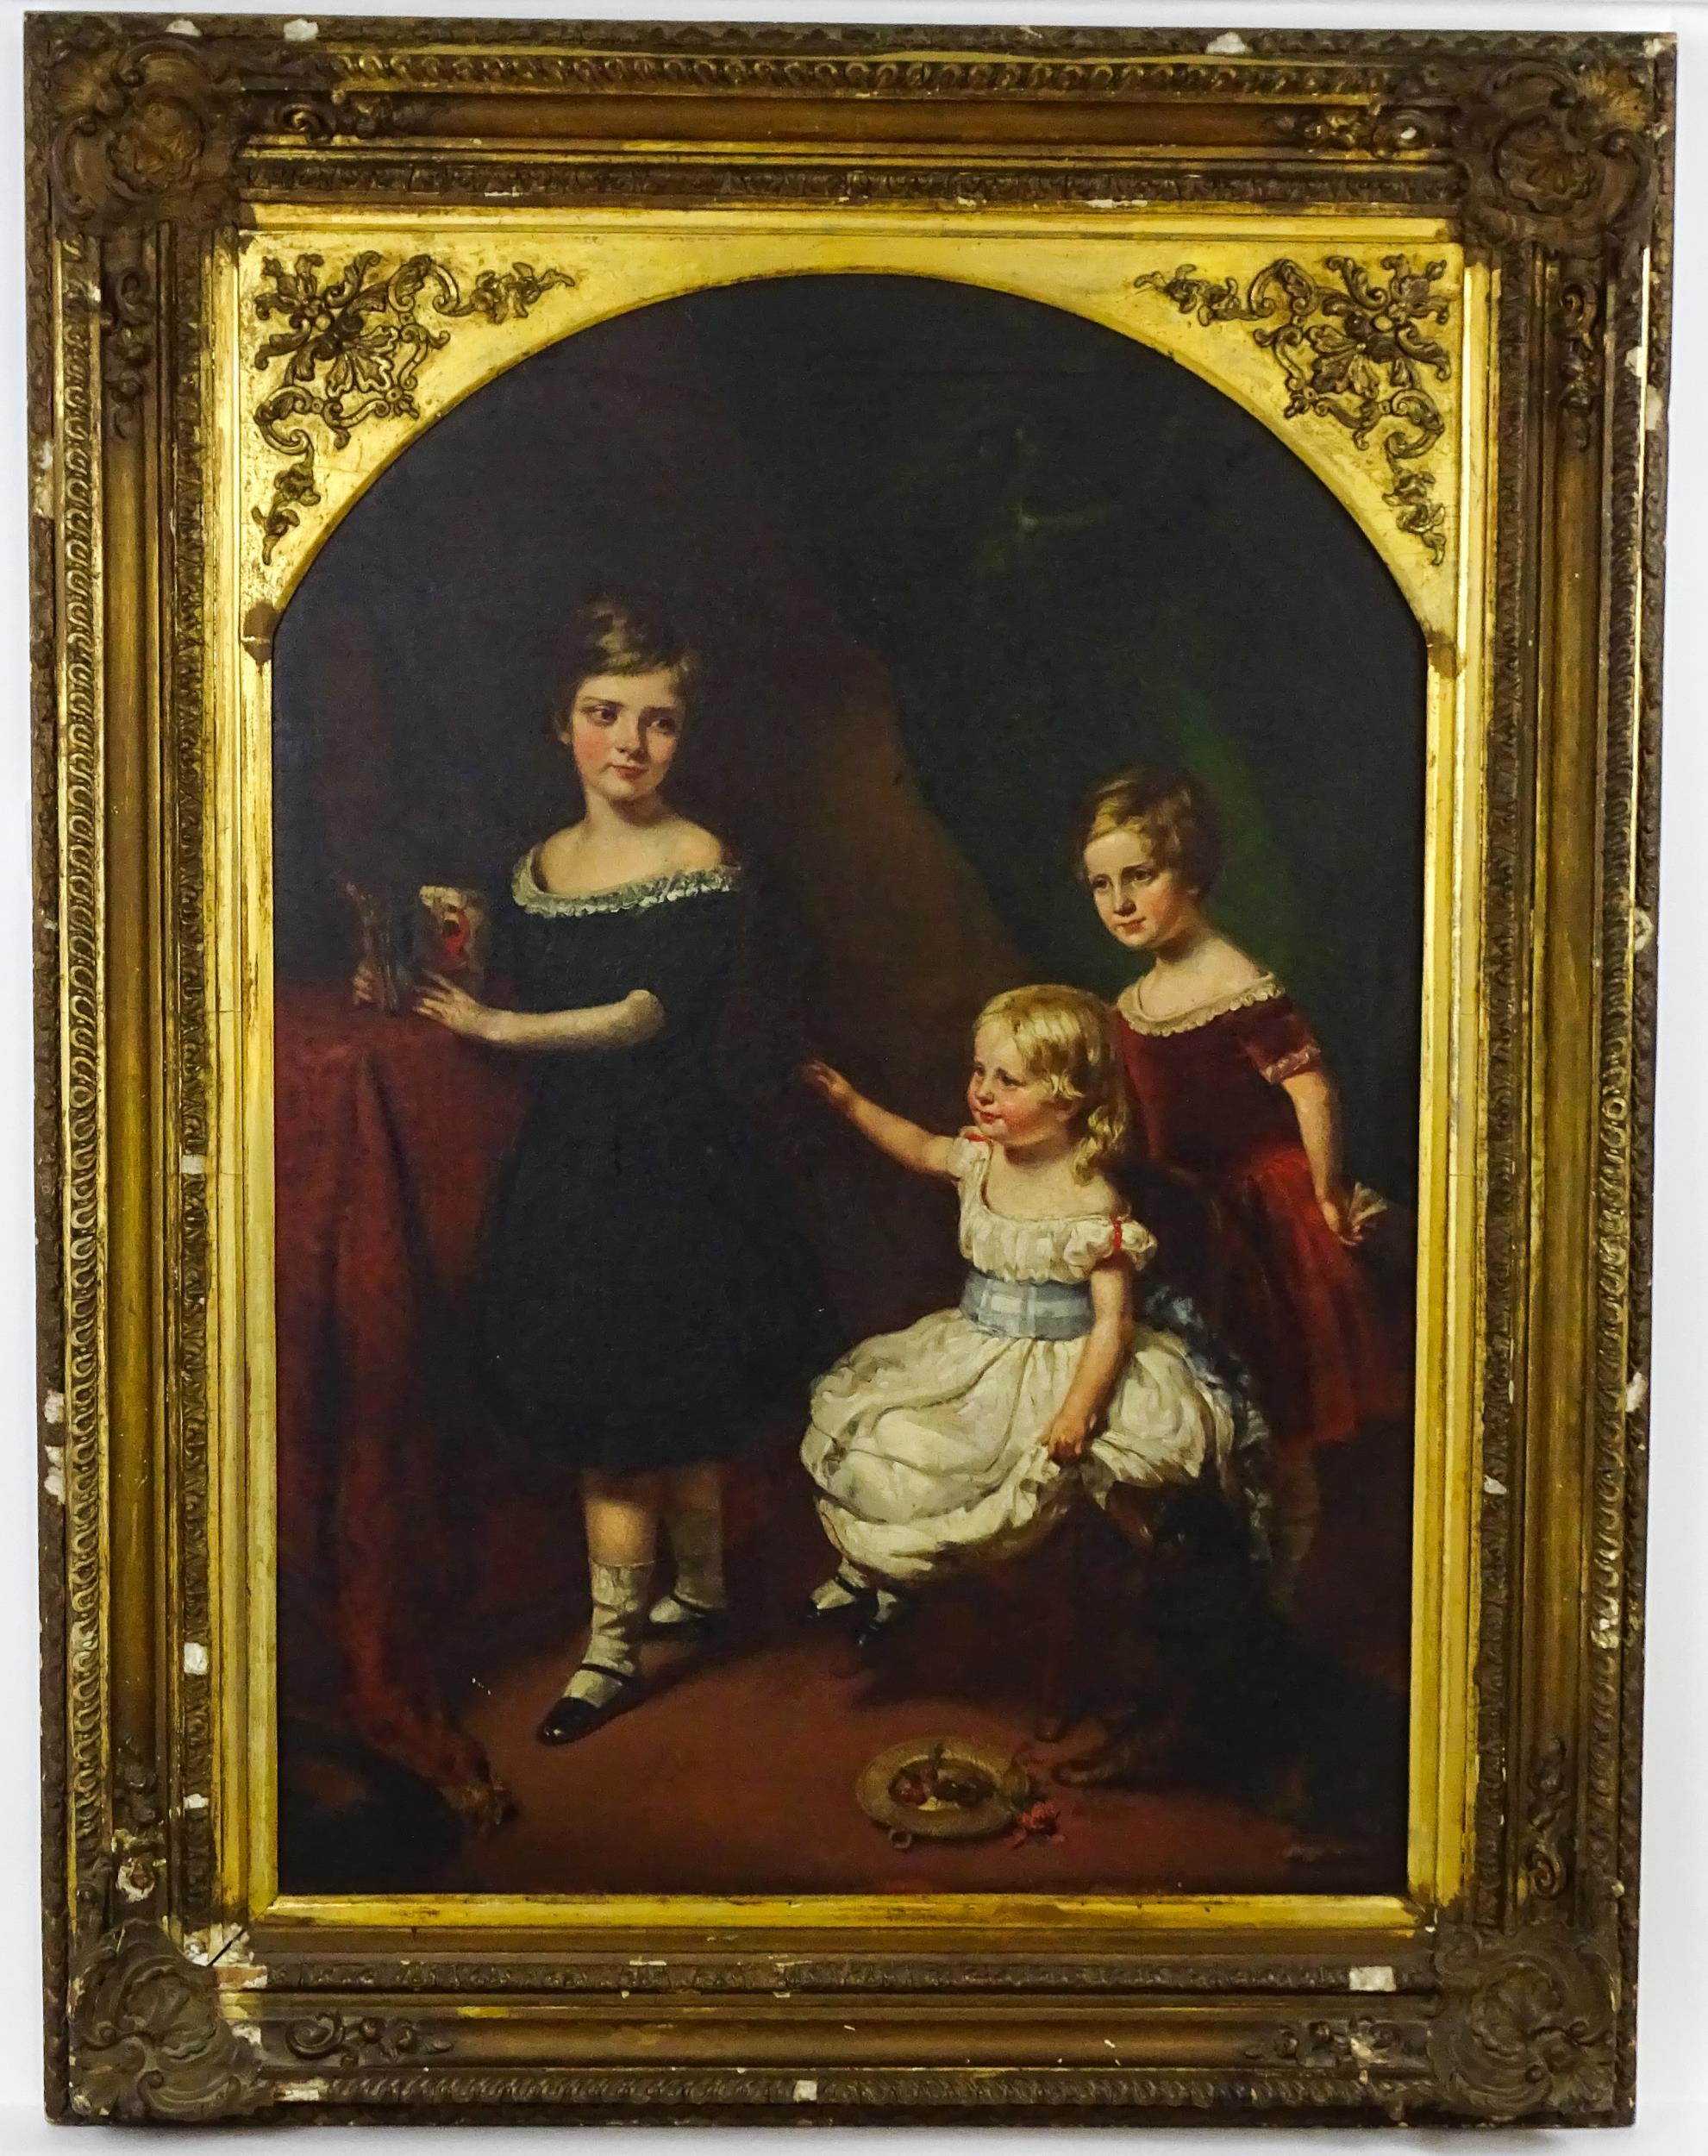 19th century, English School, Oil on canvas, A portrait of three children and a dog. Approx. 31" x - Image 3 of 4